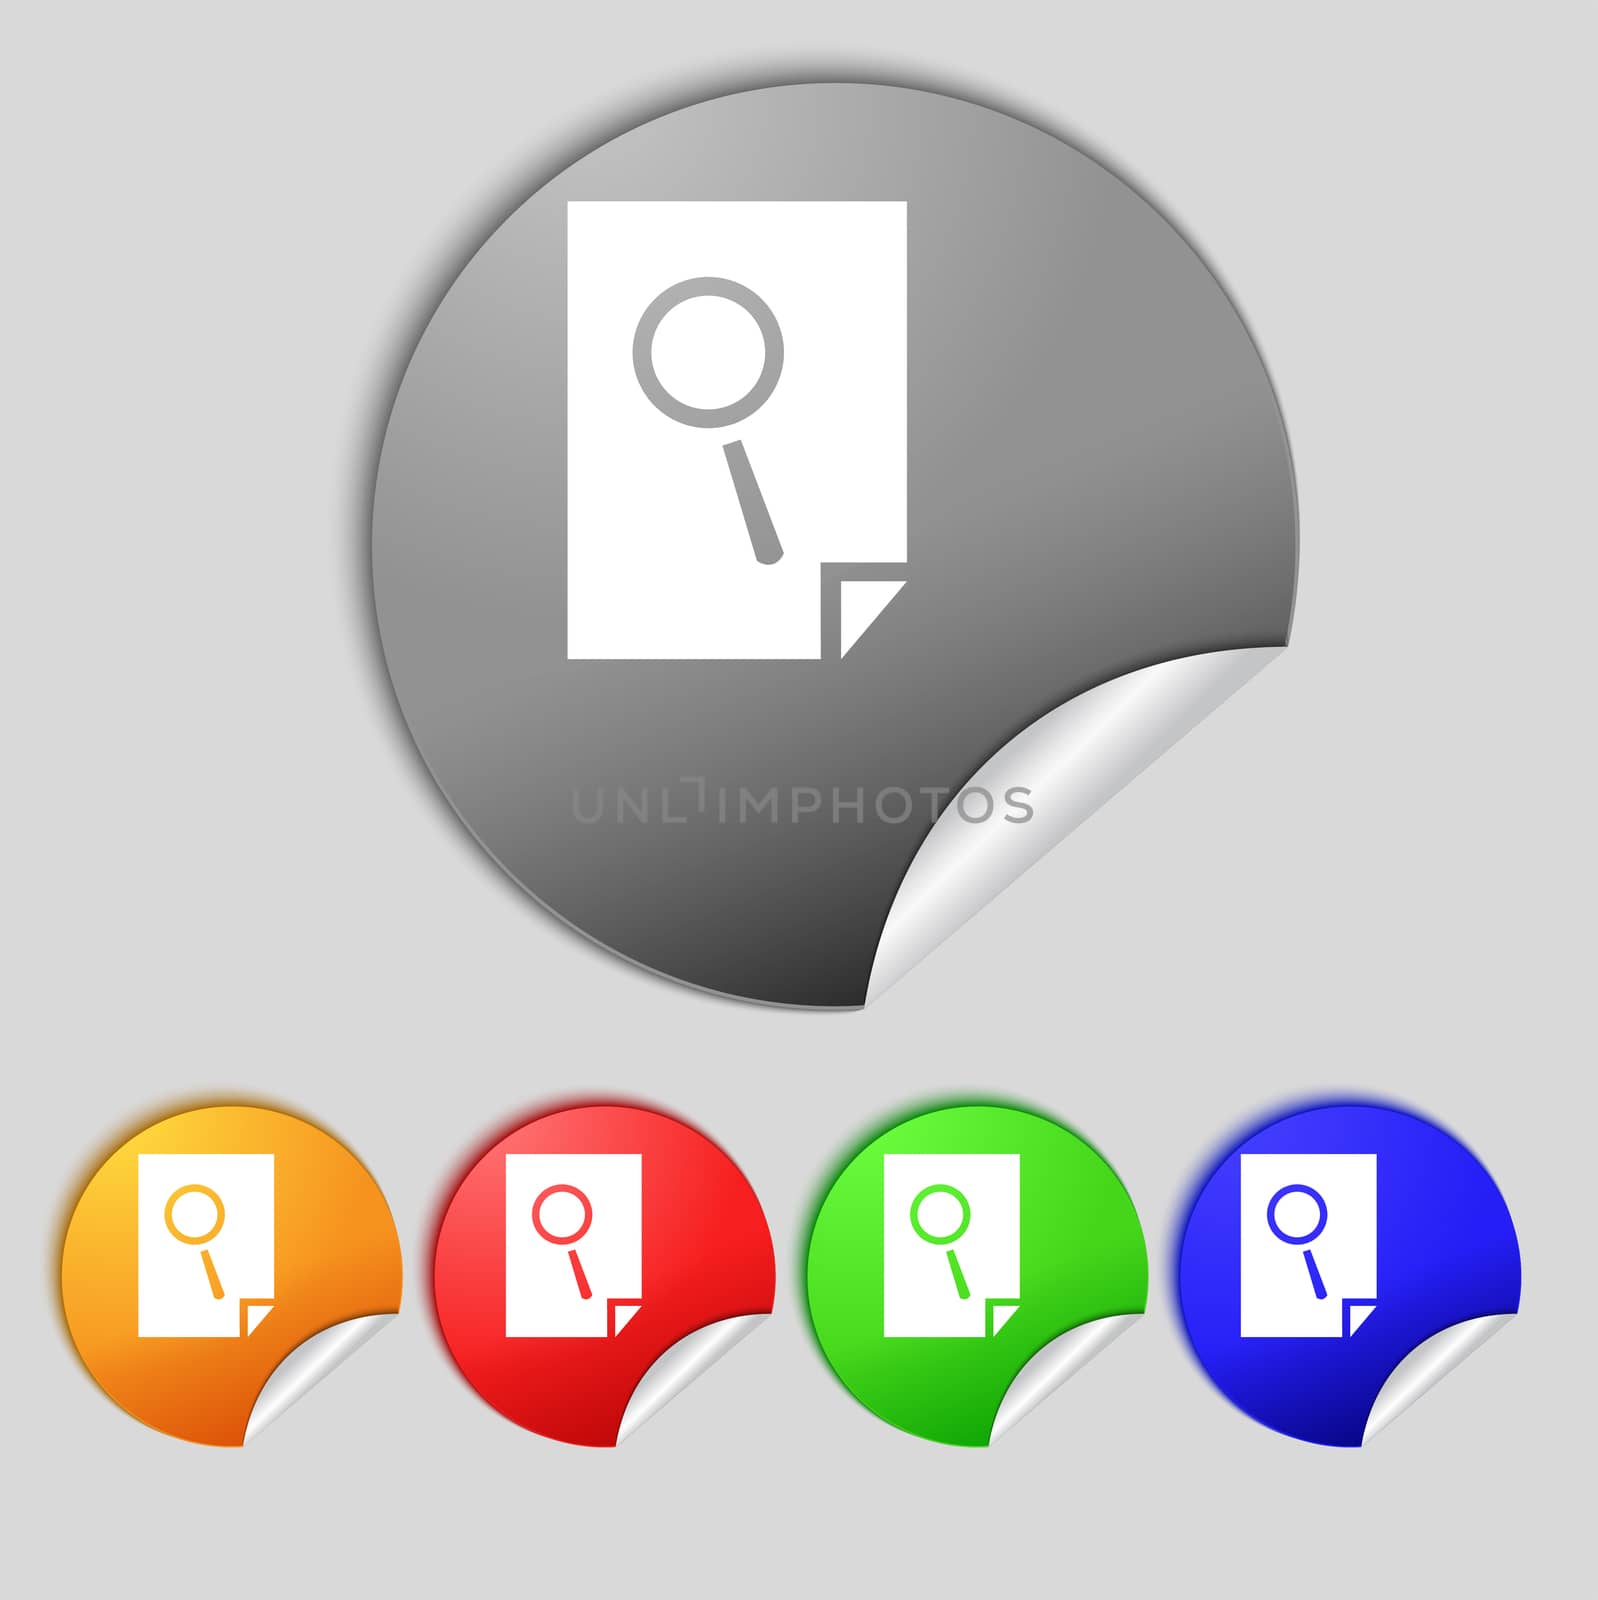 Search in file sign icon. Find document symbol. Set of colored buttons.  by serhii_lohvyniuk